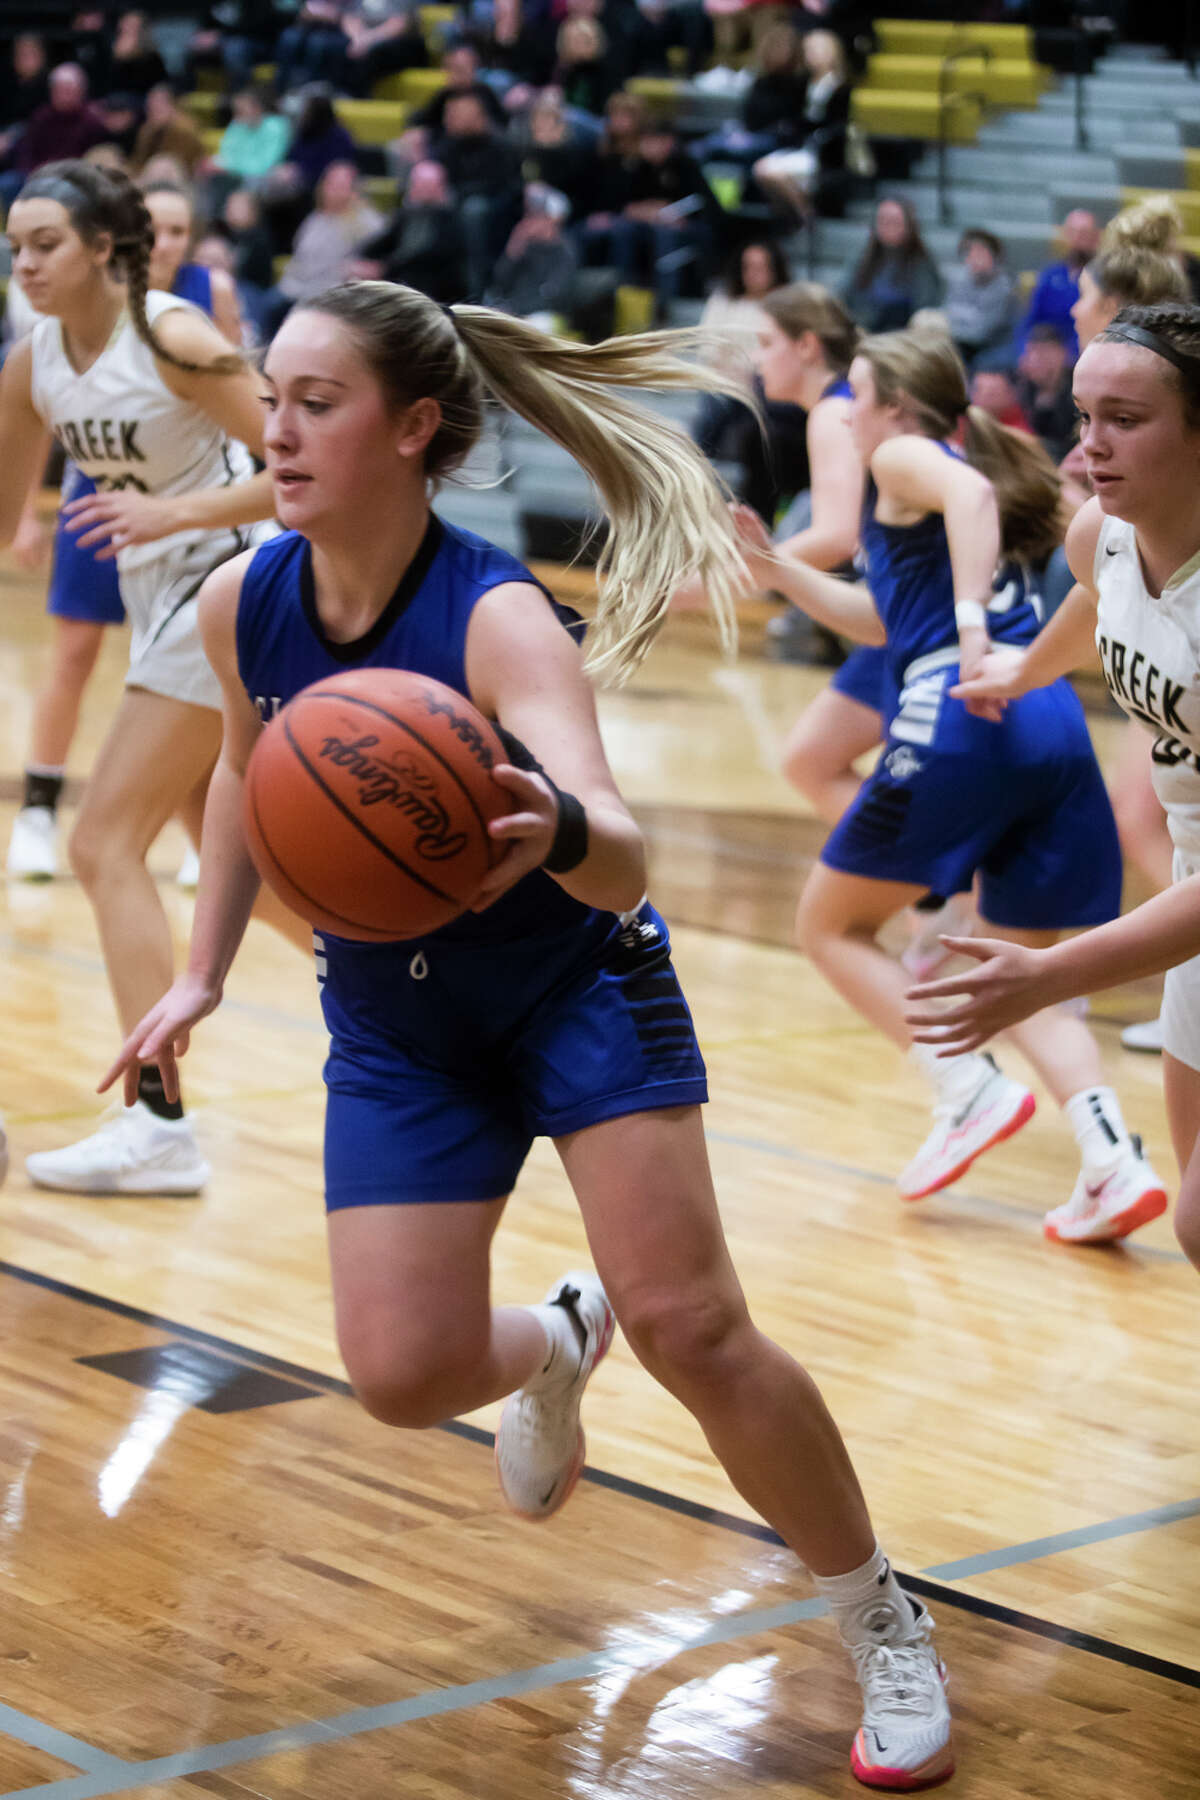 Gladwin's Lizzie Haines dribbles down the court during a game against Bullock Creek Wednesday, Dec. 1, 2021 at Bullock Creek High School.